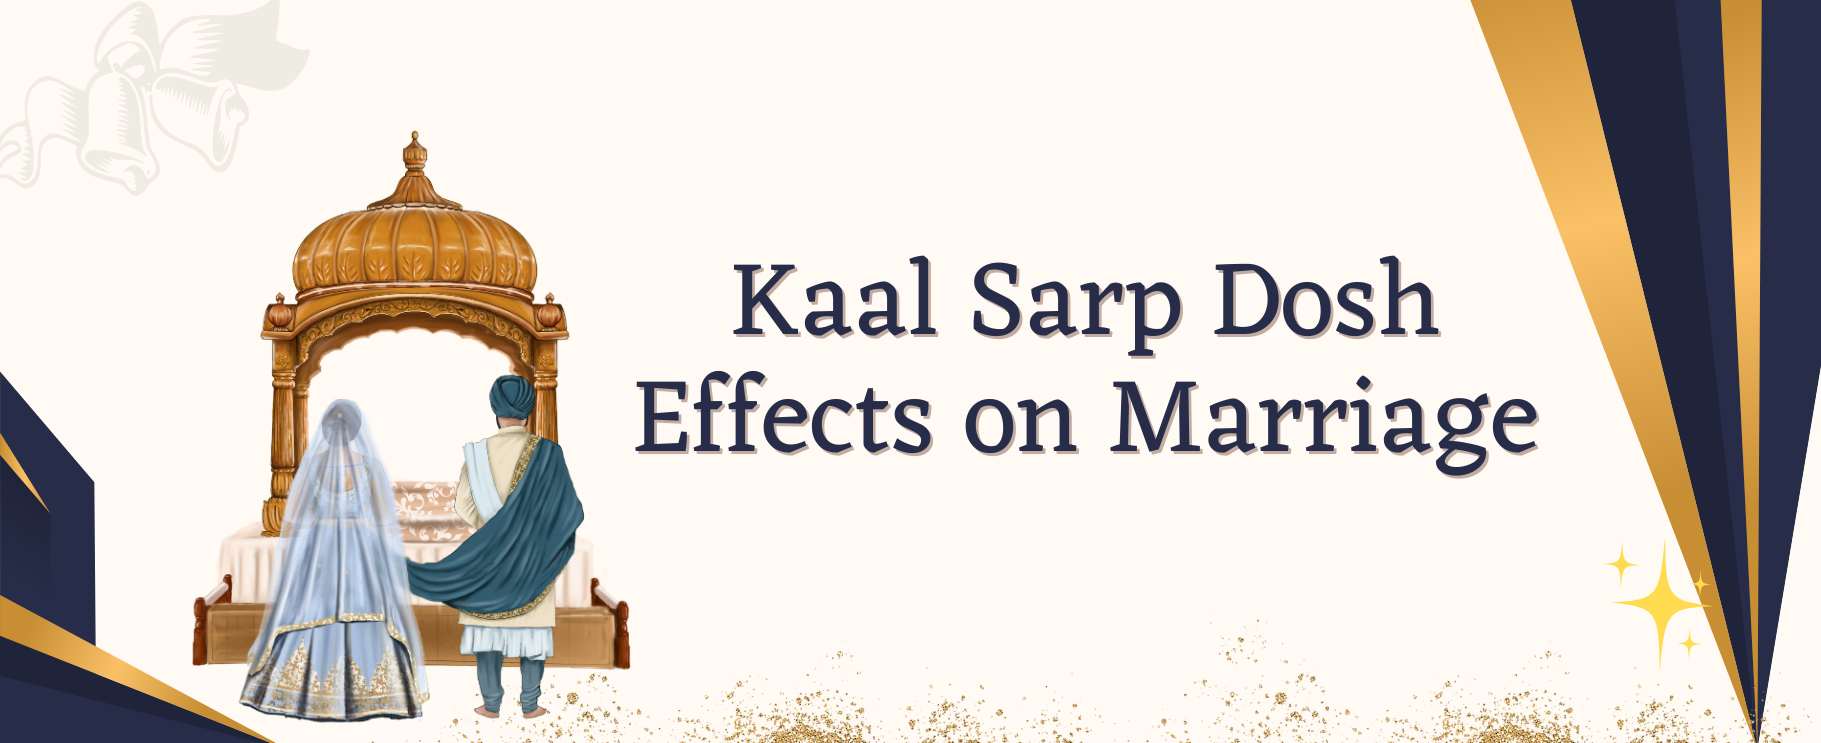 Kaal-Sarp-Dosh-Effects-on-Marriage